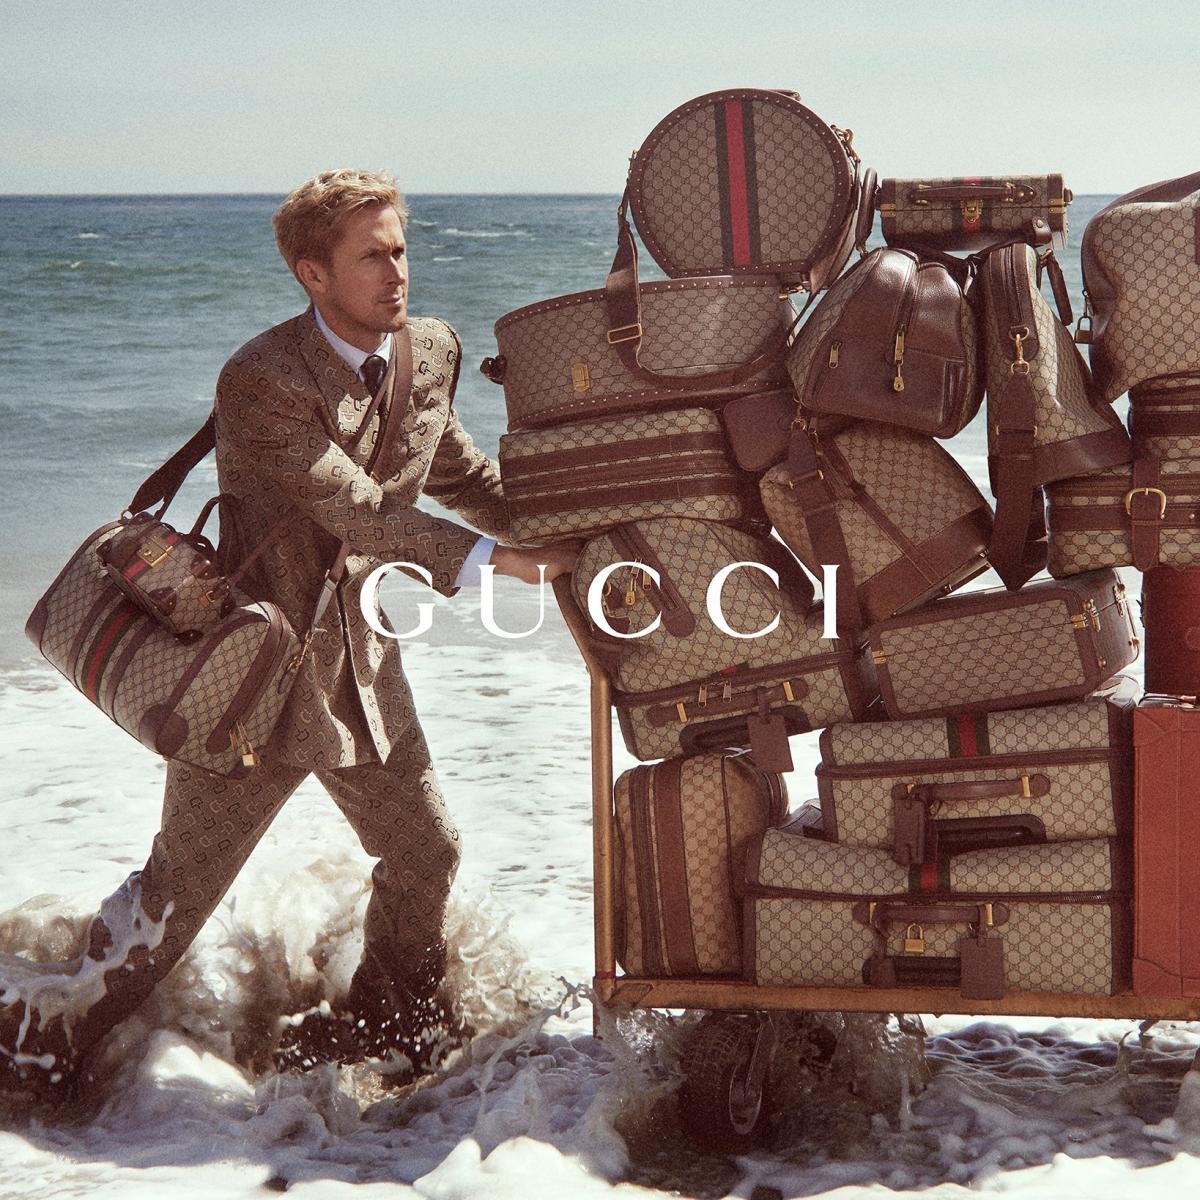 Image gallery for Gucci Travel Campaign (S) - FilmAffinity